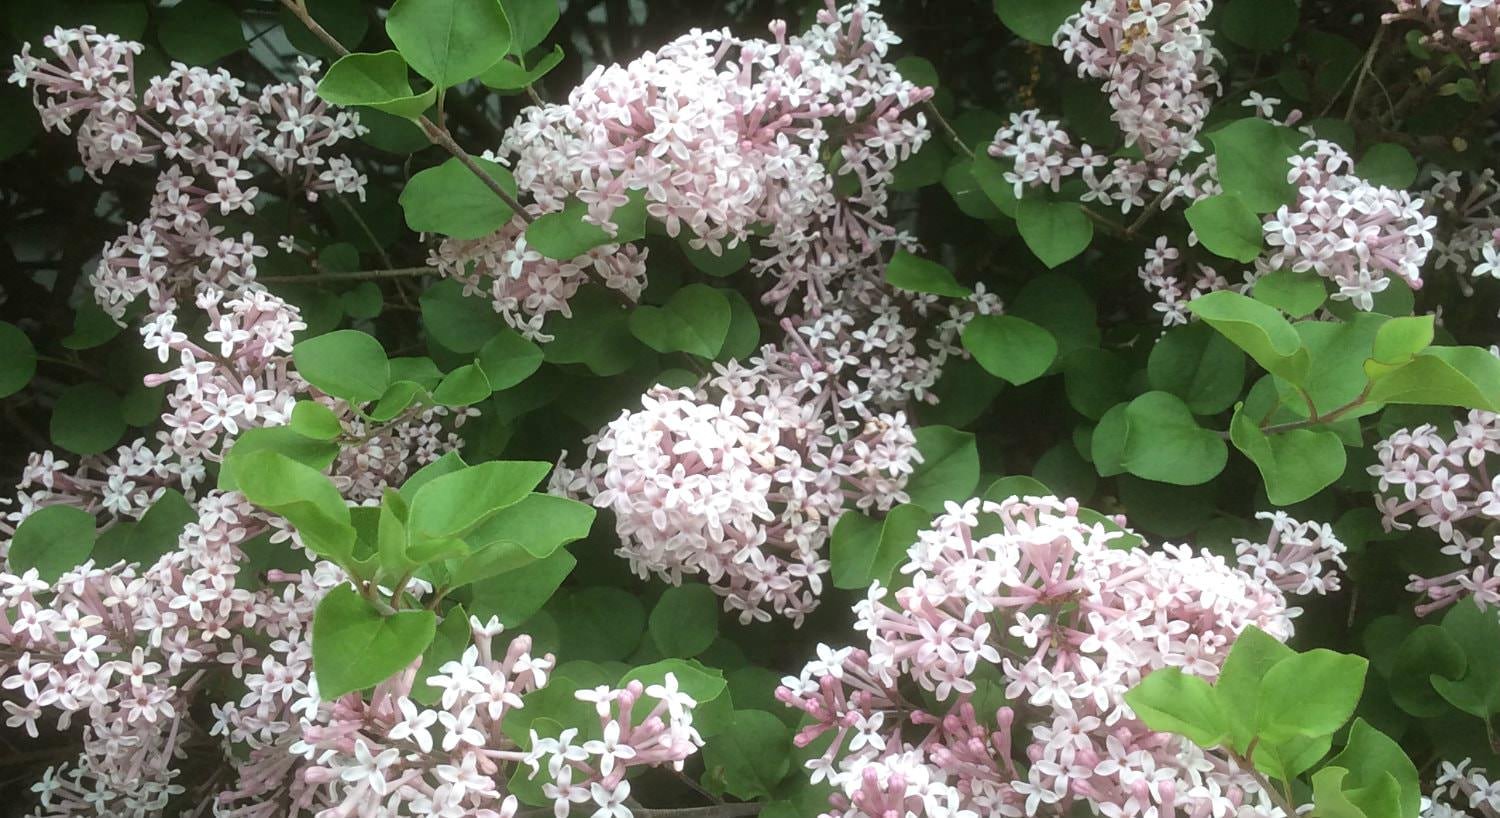 Close-up view of small pink and white flowers surrounded by green leaves